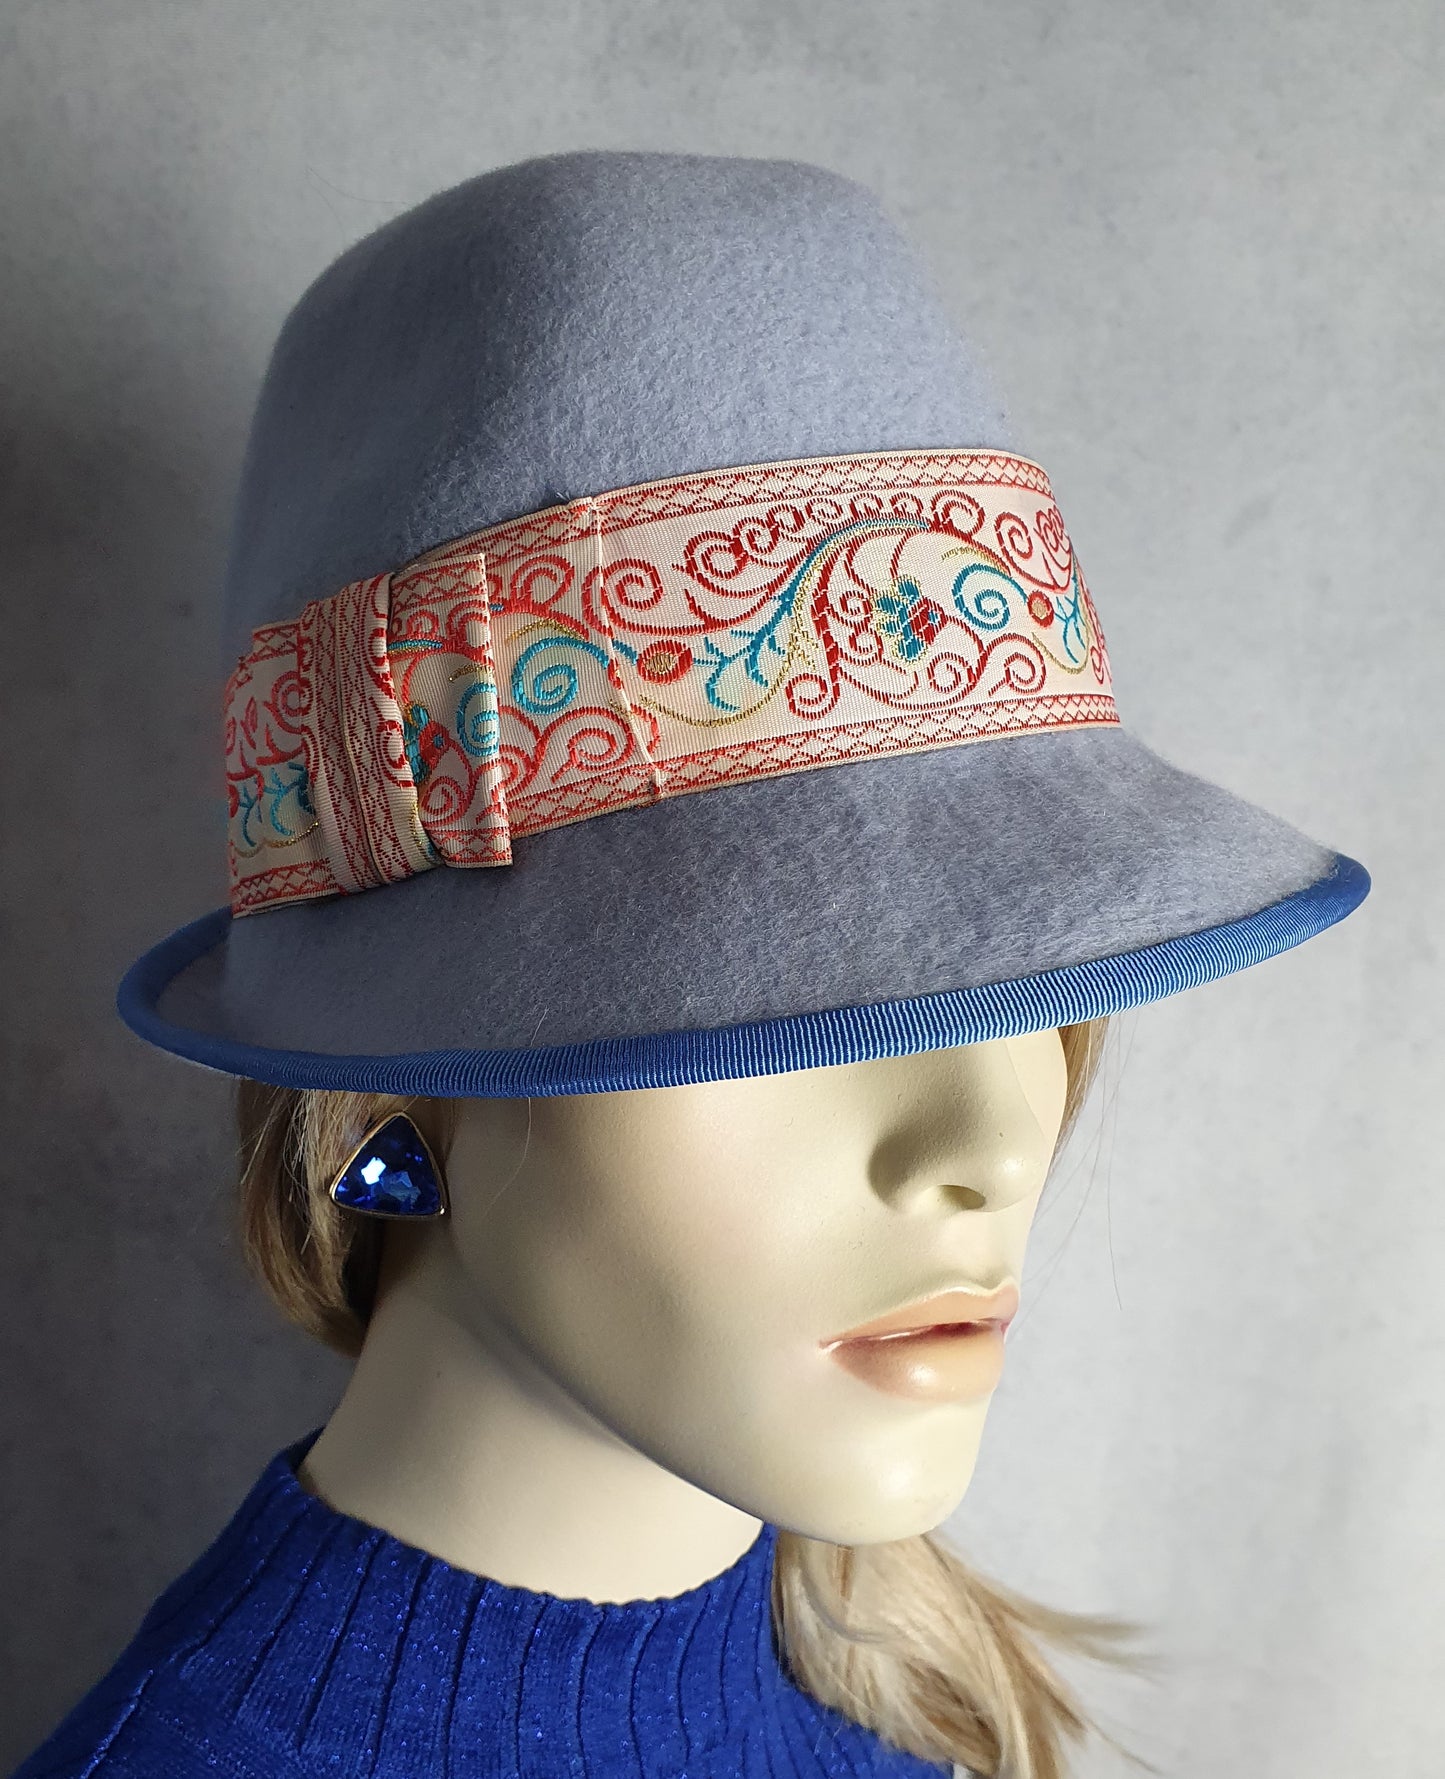 Handmade blue felt fedora hat for women and men, hair accessory, stylish hat unisex, winter hat- special occasions